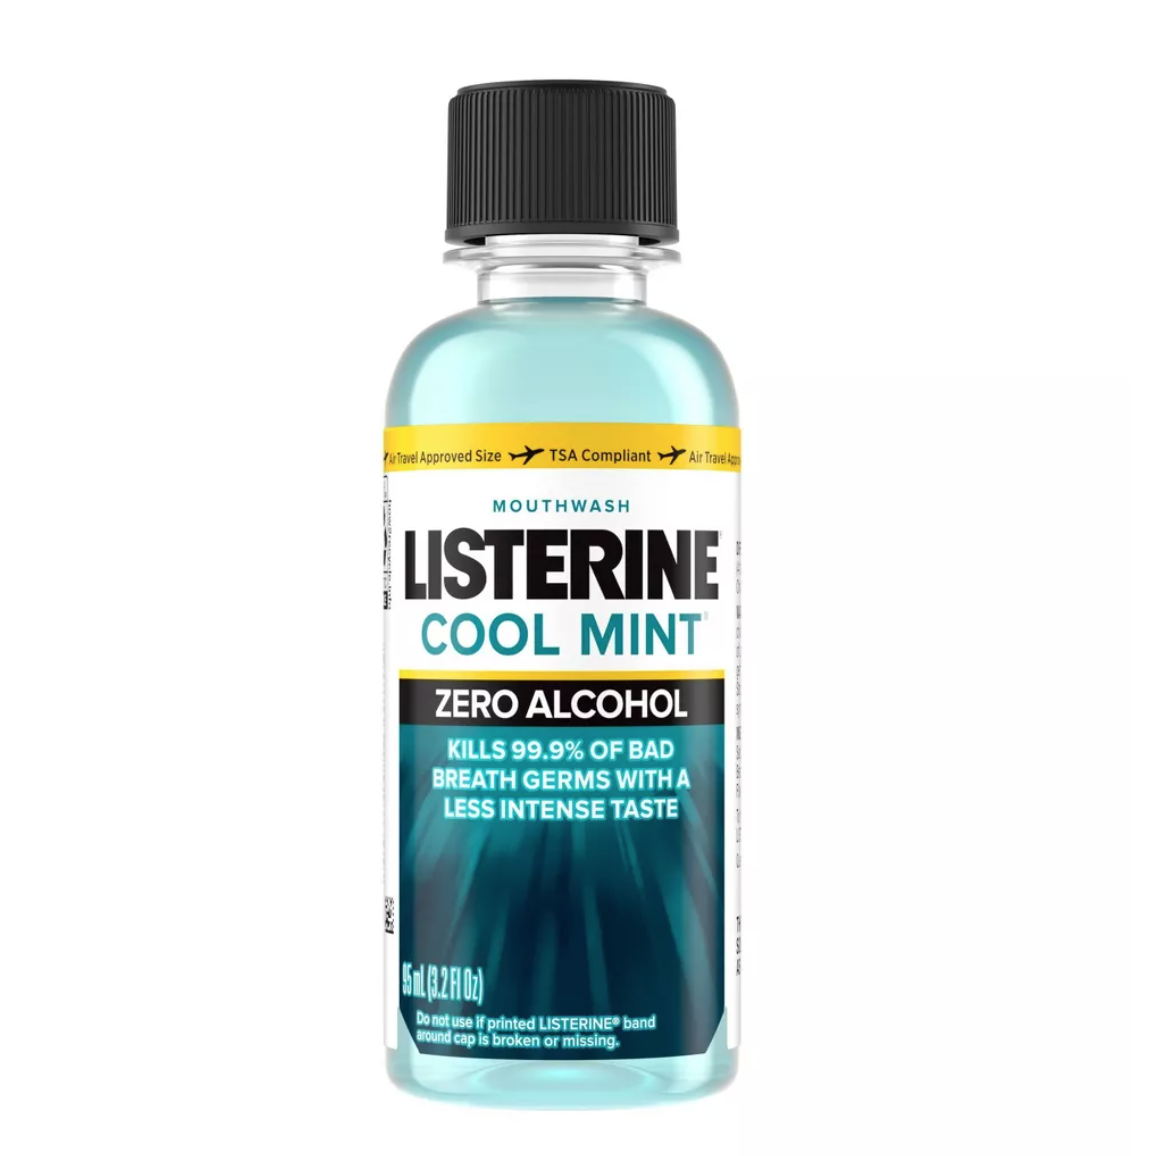 Listerine Coolmint Zero Alcohol Mouth Wash Travel Size